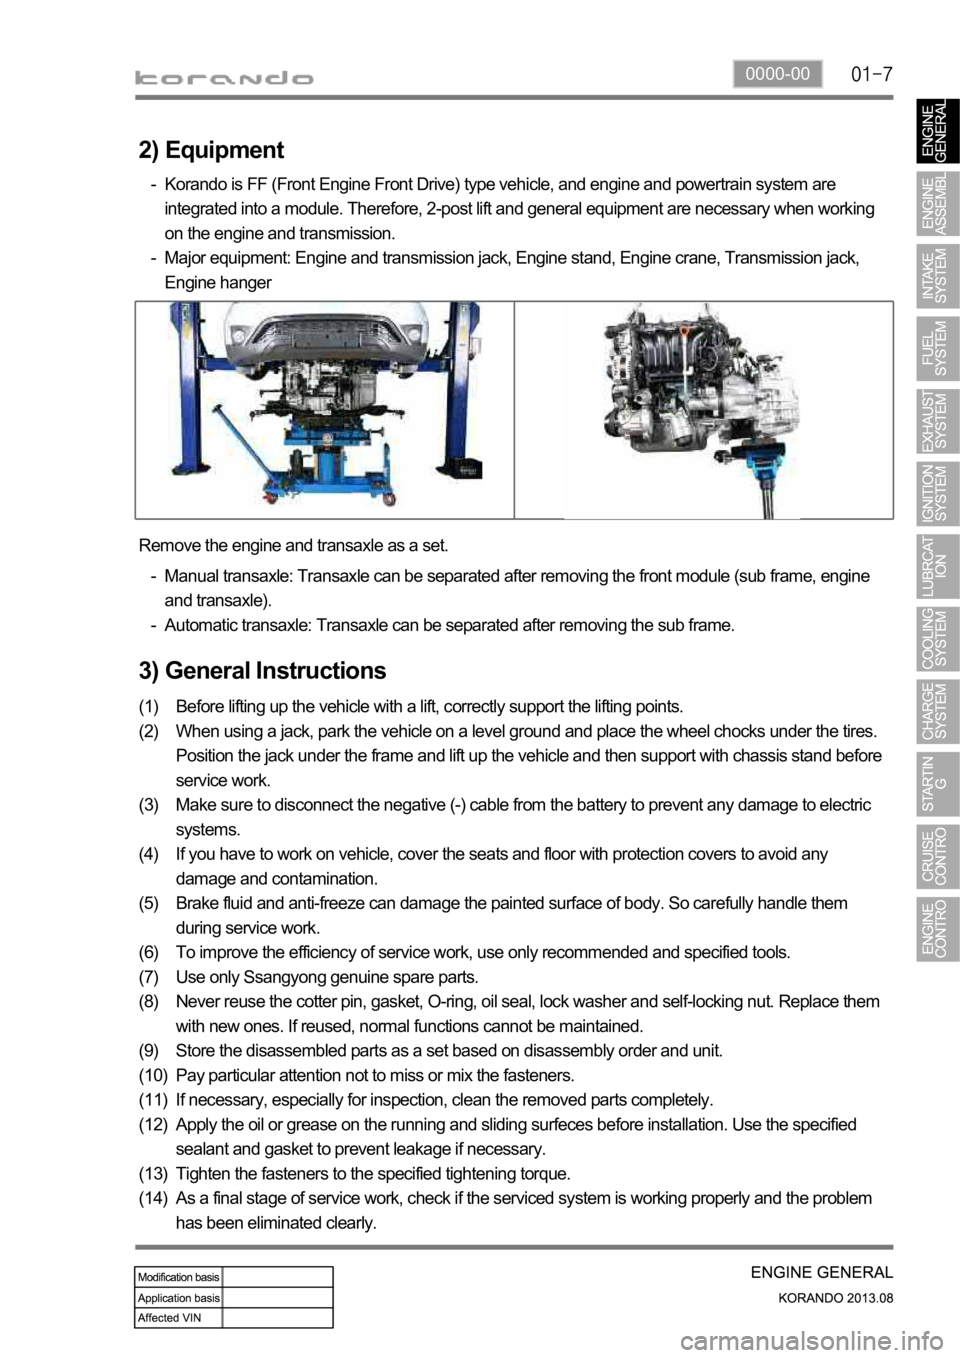 SSANGYONG KORANDO 2013 Owners Manual 0000-00
3) General Instructions
Before lifting up the vehicle with a lift, correctly support the lifting points.
When using a jack, park the vehicle on a level ground and place the wheel chocks under 